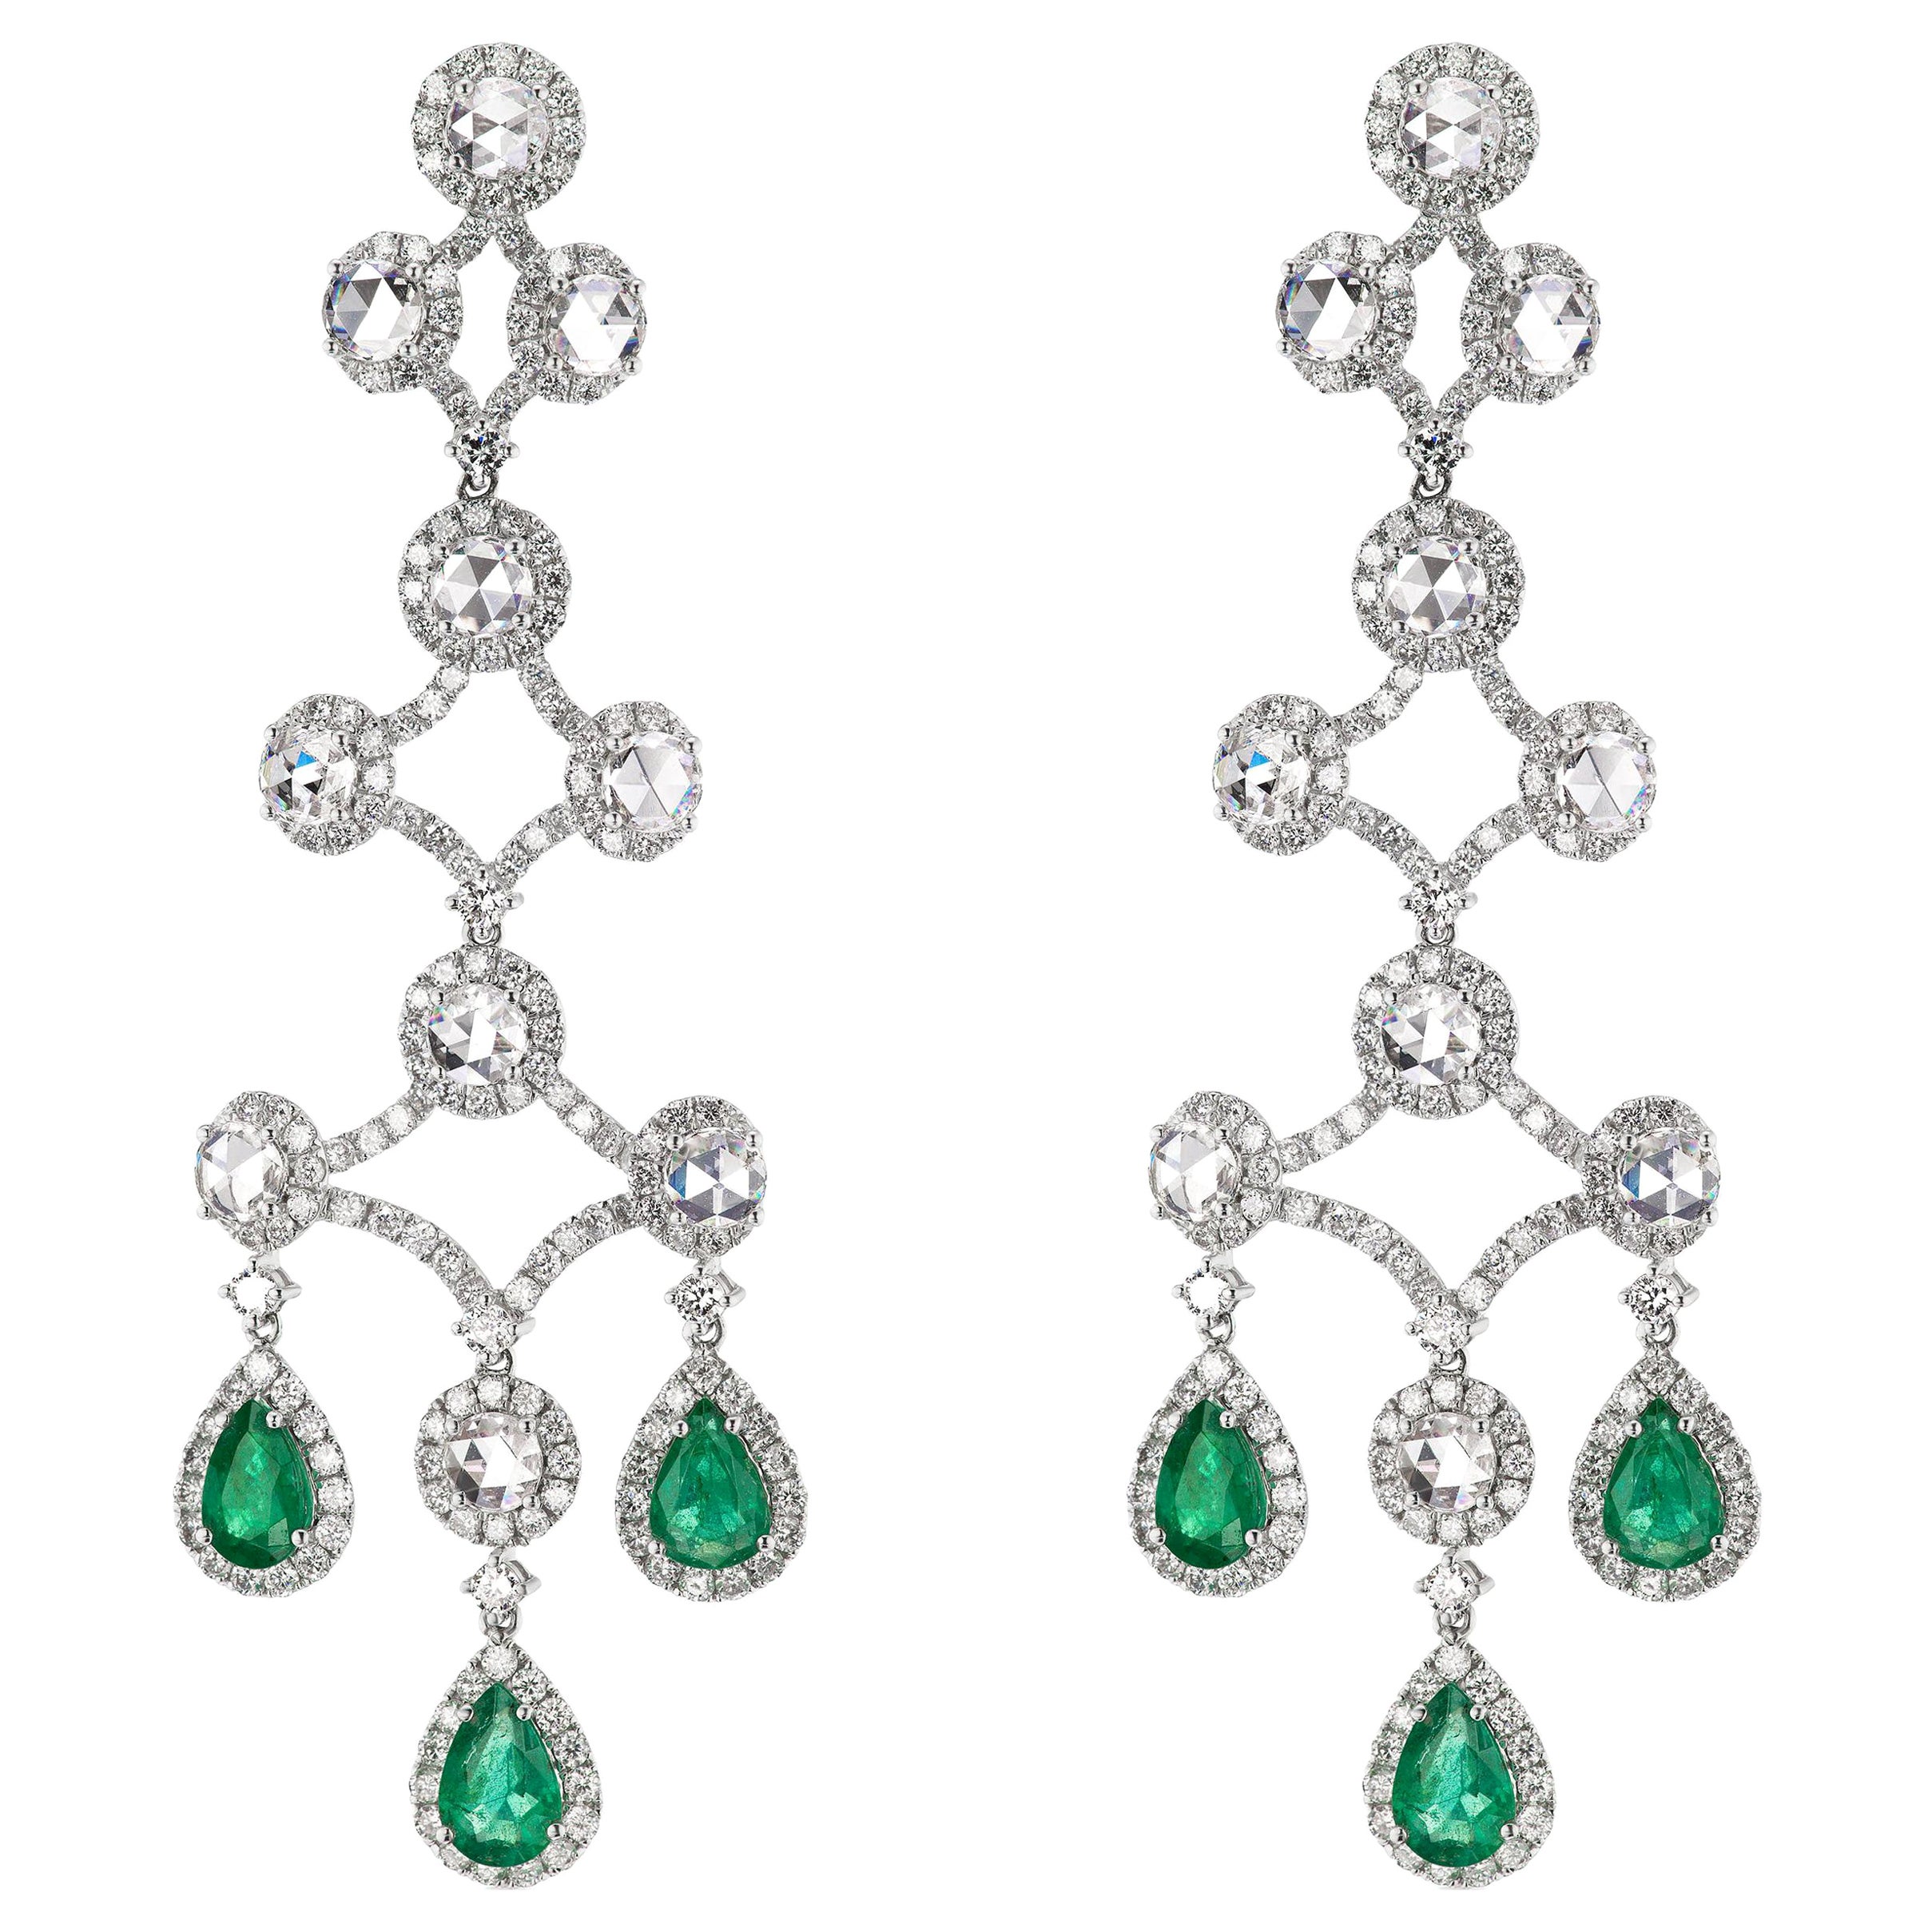 Nigaam 12.2 Cts. Emerald and Diamond Chandelier Earrings in 18K White Gold For Sale